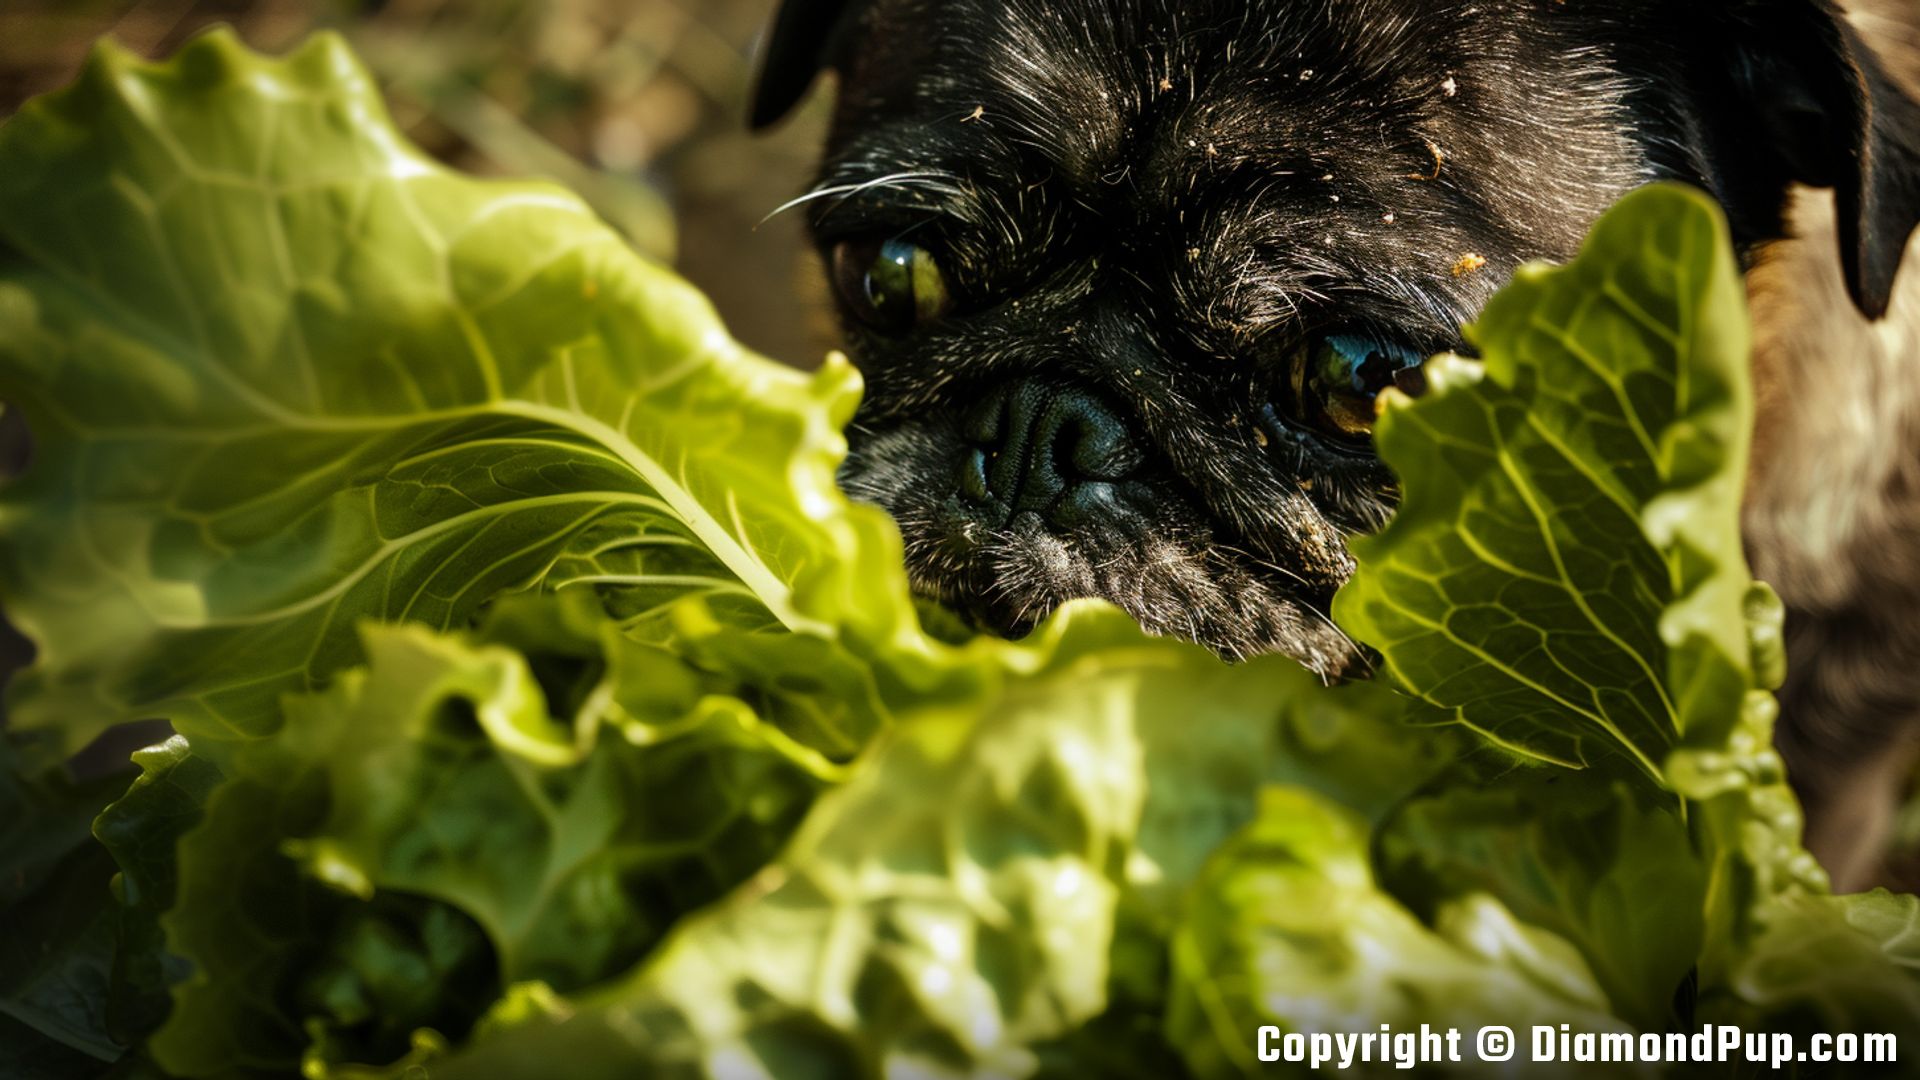 Picture of a Happy Pug Eating Lettuce